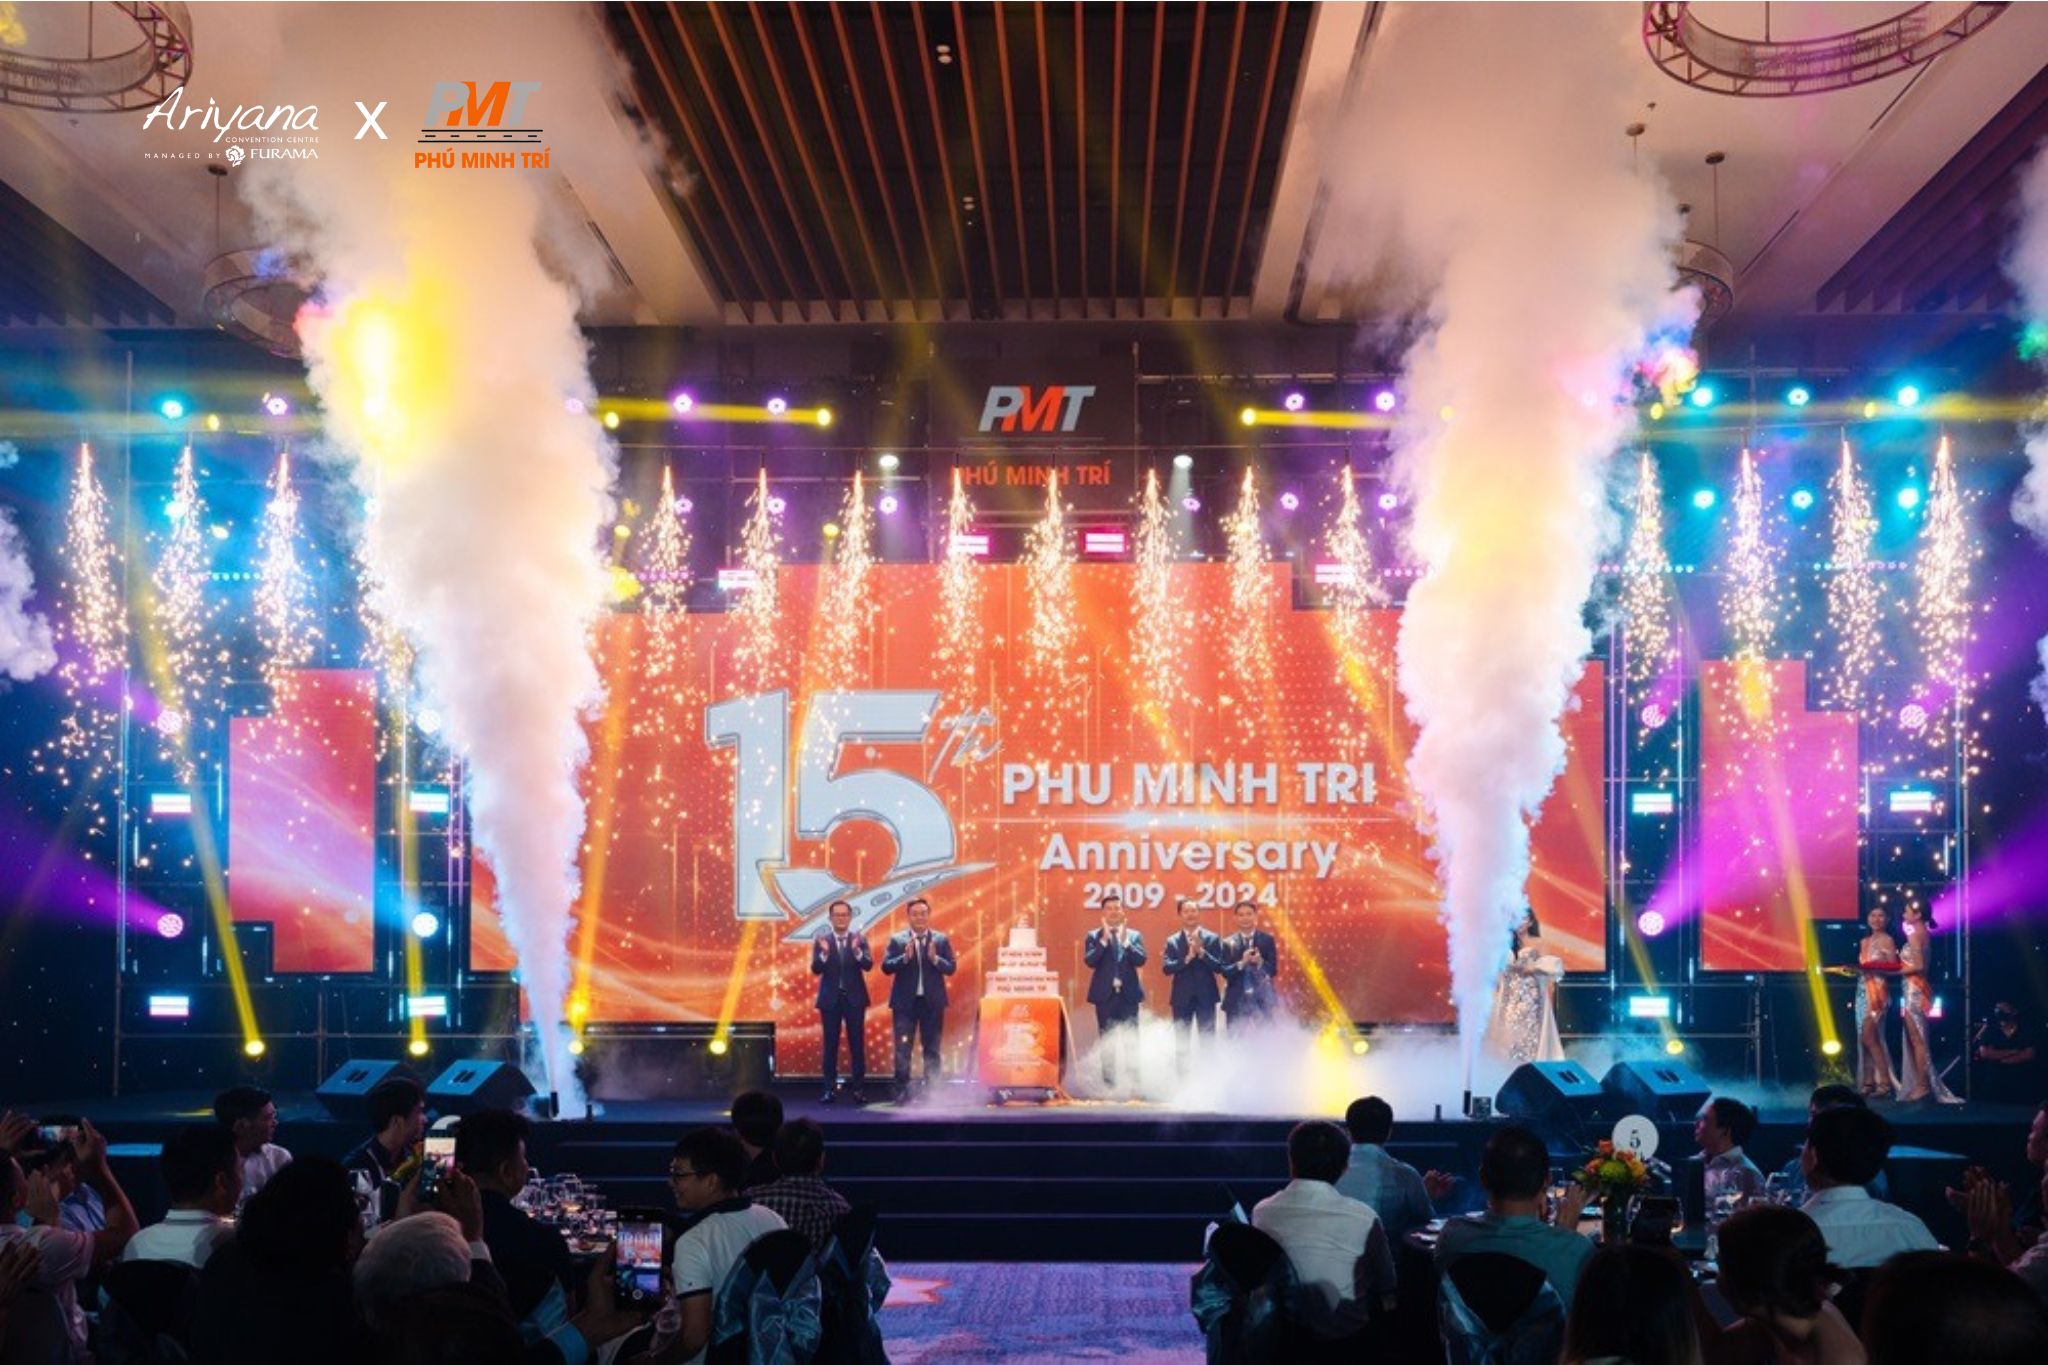 More than 400 distinguished guests attended the 15th Anniversary Celebration of Phu Minh Tri Company at Ariyana Convention Centre Da Nang